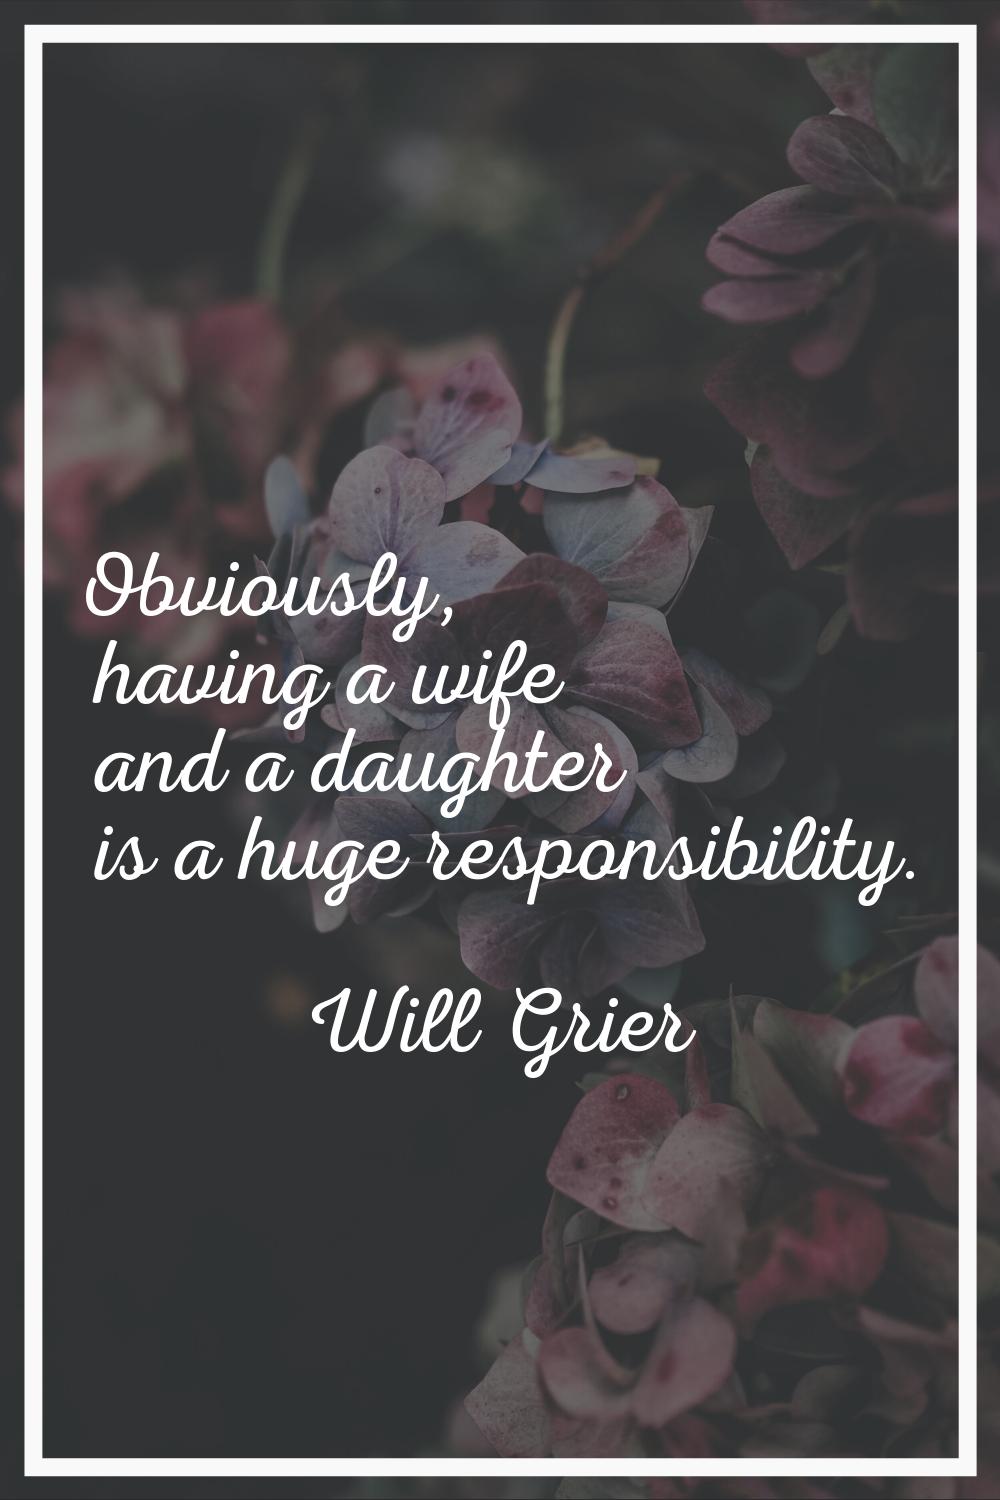 Obviously, having a wife and a daughter is a huge responsibility.